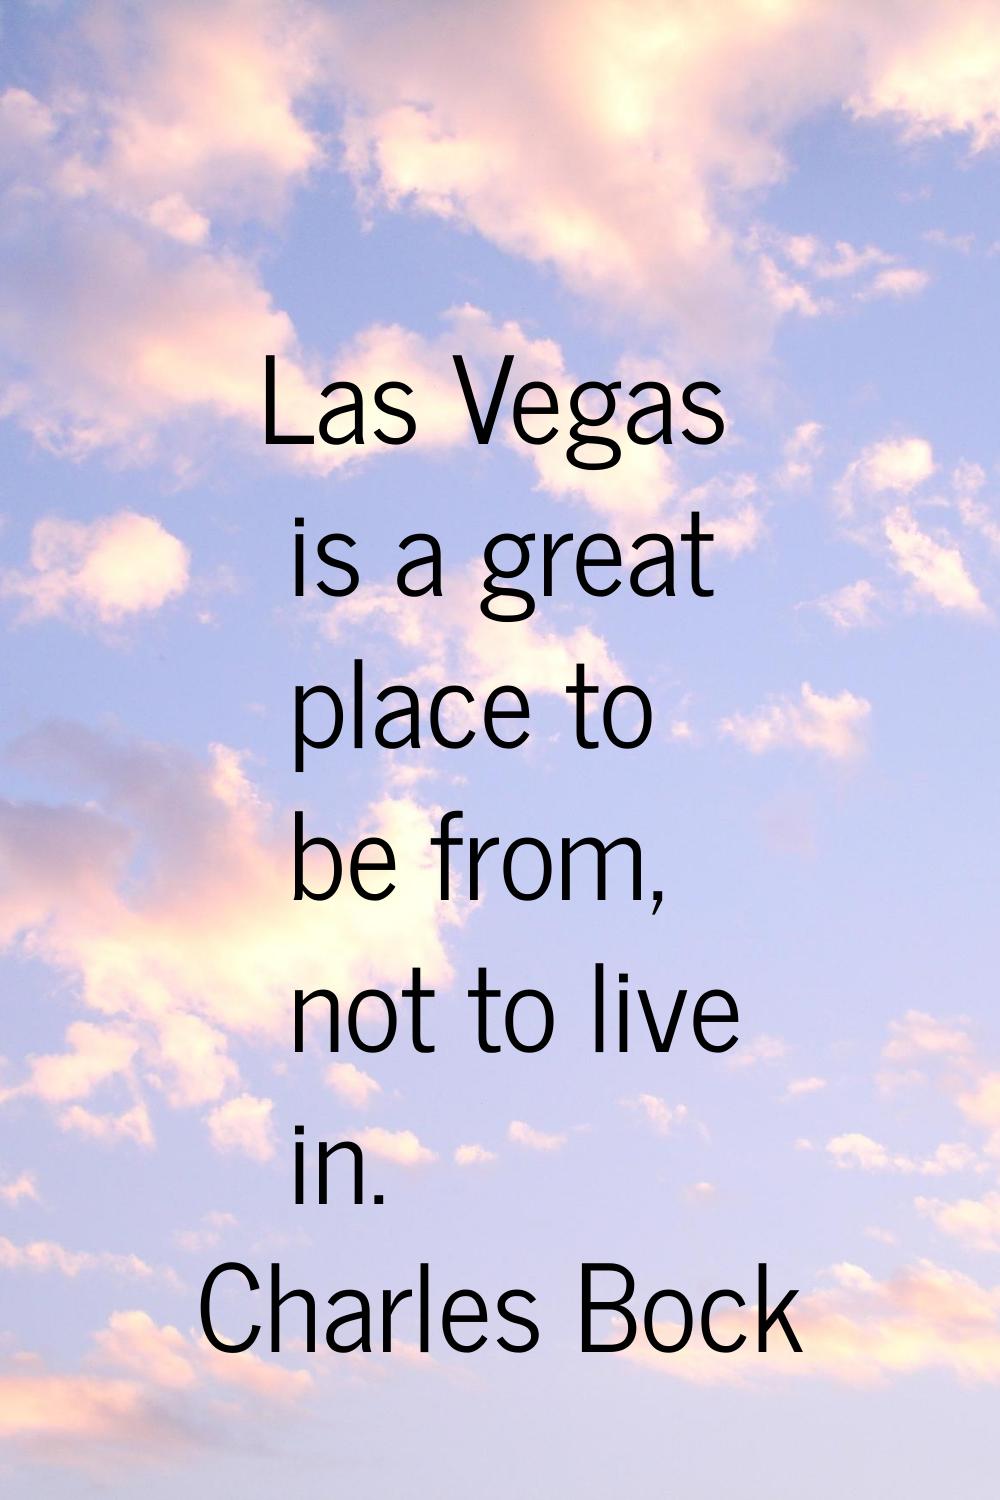 Las Vegas is a great place to be from, not to live in.